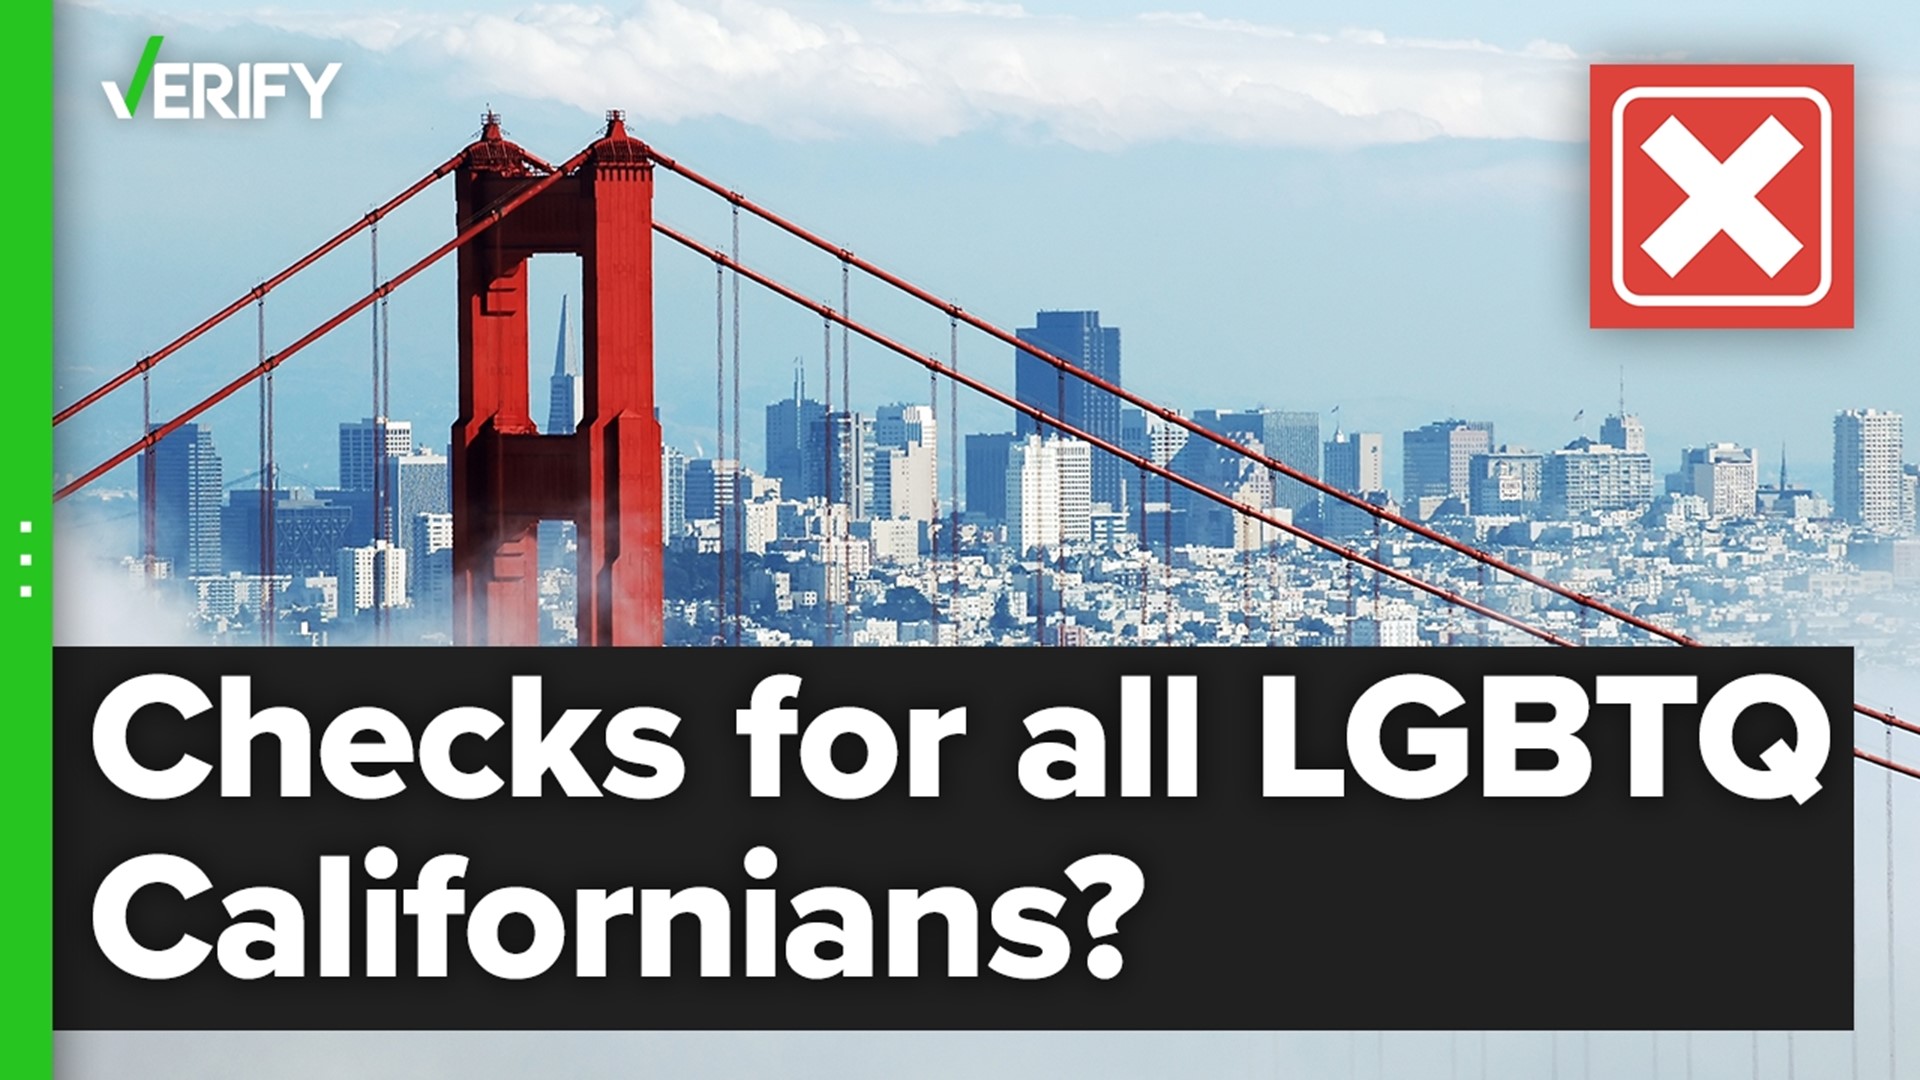 The City of San Francisco has launched a guaranteed income pilot program for some trans residents, but it's limited to 55 low-income San Franciscans.